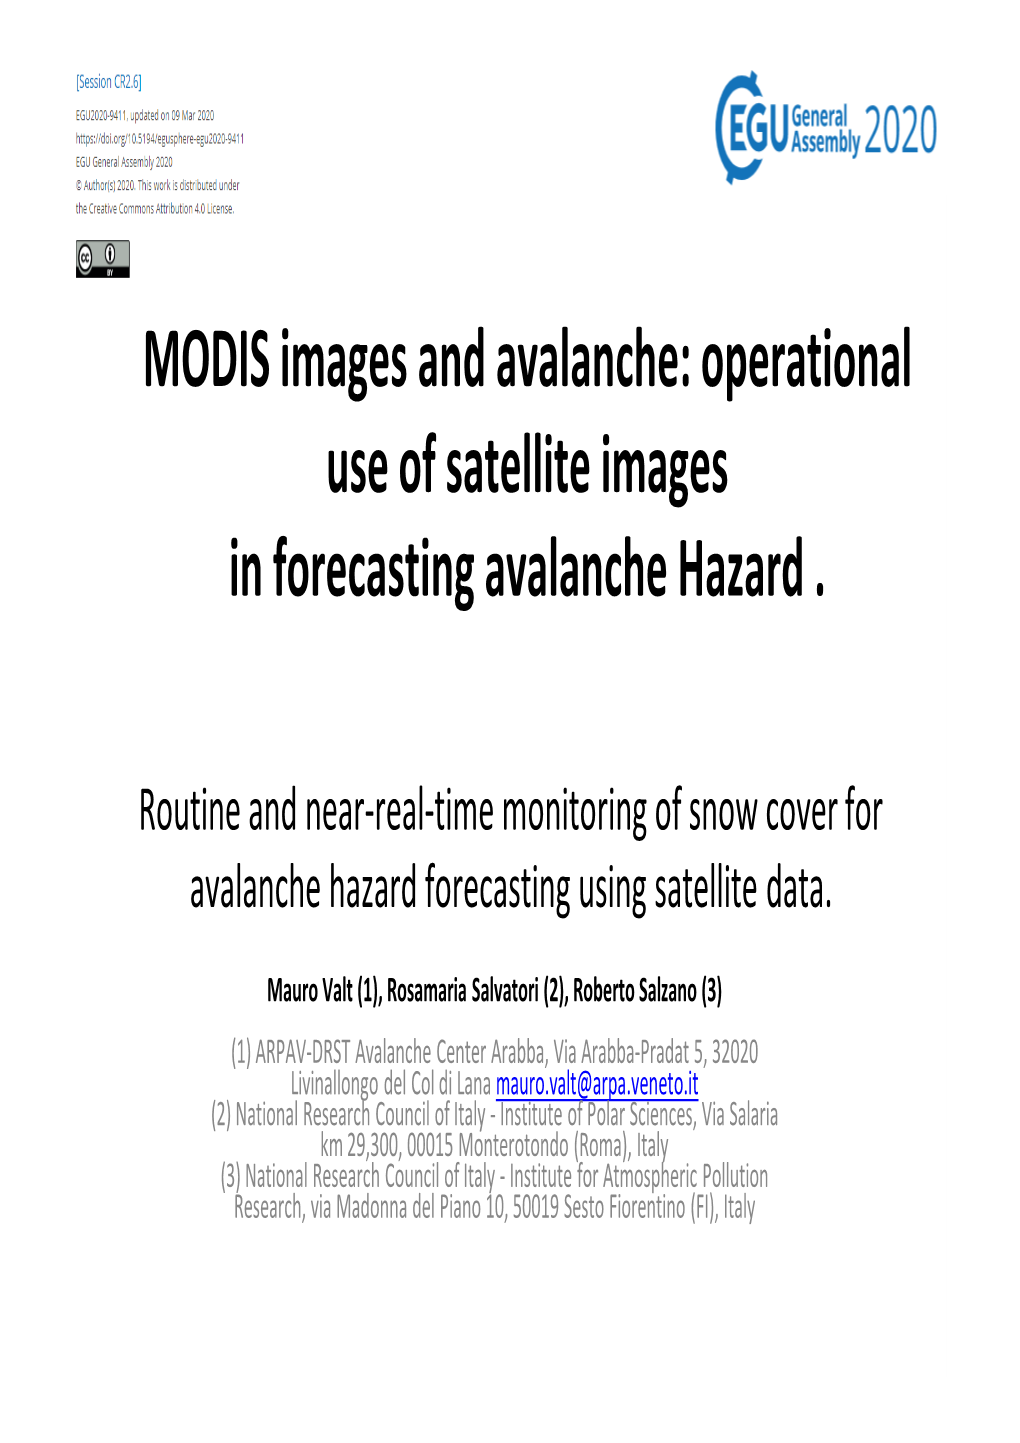 MODIS Images and Avalanche: Operational Use of Satellite Images in Forecasting Avalanche Hazard